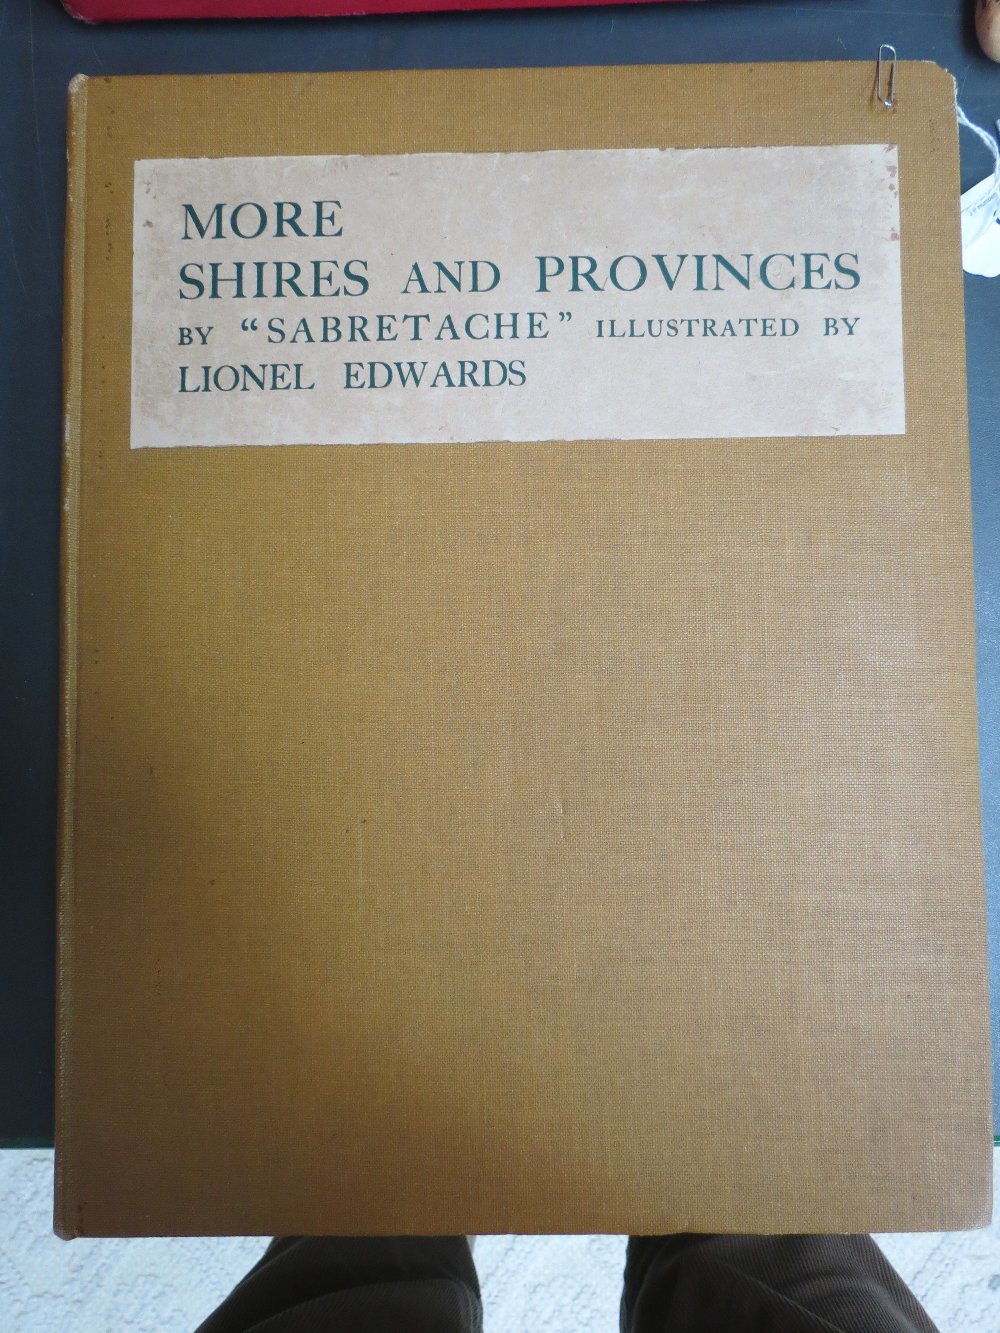 Book: 'More shires and provinces' by Sabretache and illustrated by Lionel Edwards. A pencilled